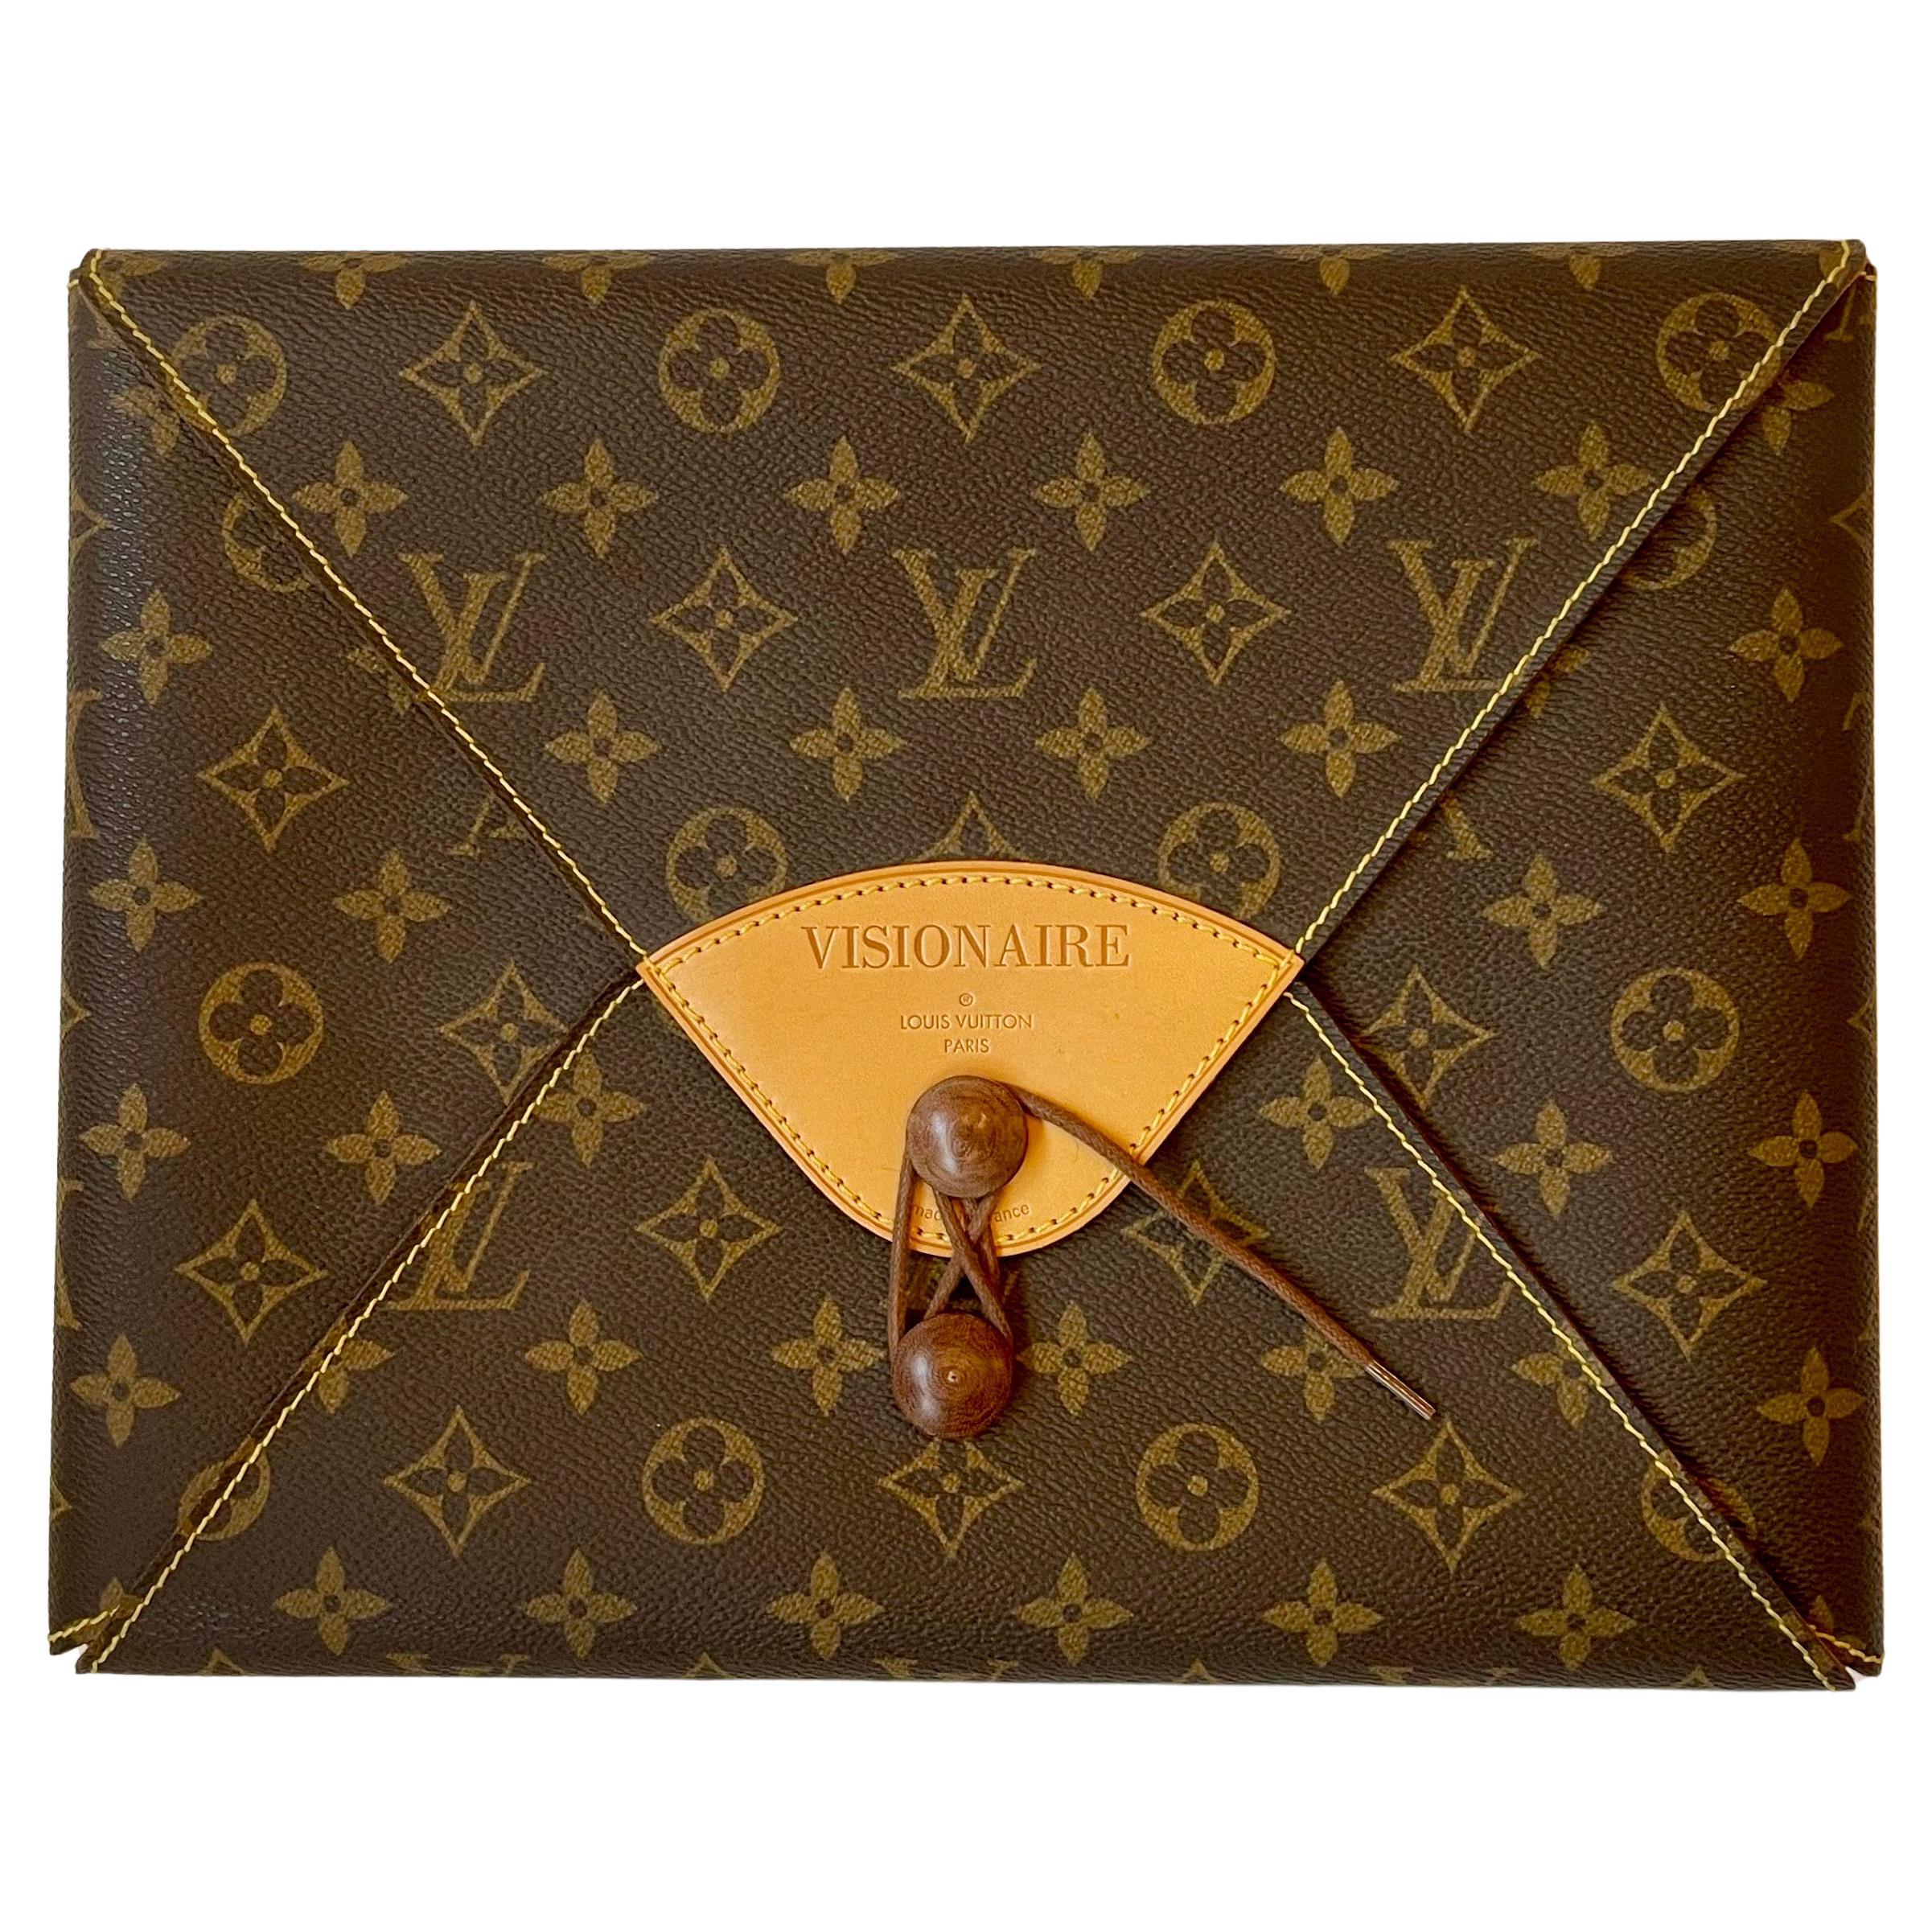 Visionaire No.18: Fashion Special in Louis Vuitton Leather Case, Fall, 1996 For Sale